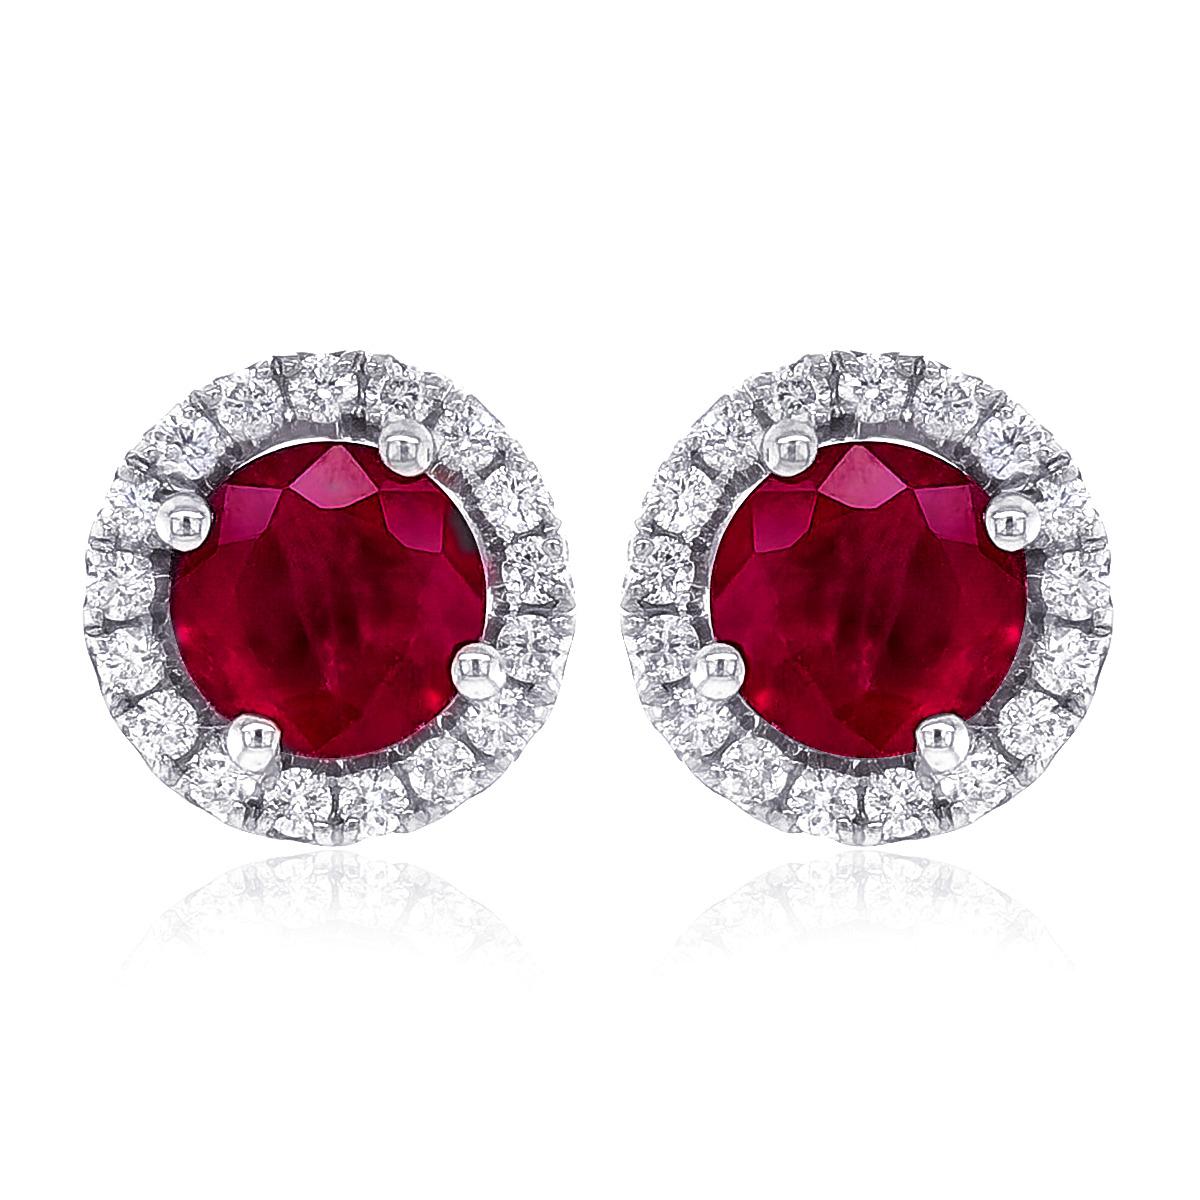 Natural Ruby 1.07 Carats set in 14K White Gold Earrings with Diamonds  In New Condition For Sale In Los Angeles, CA